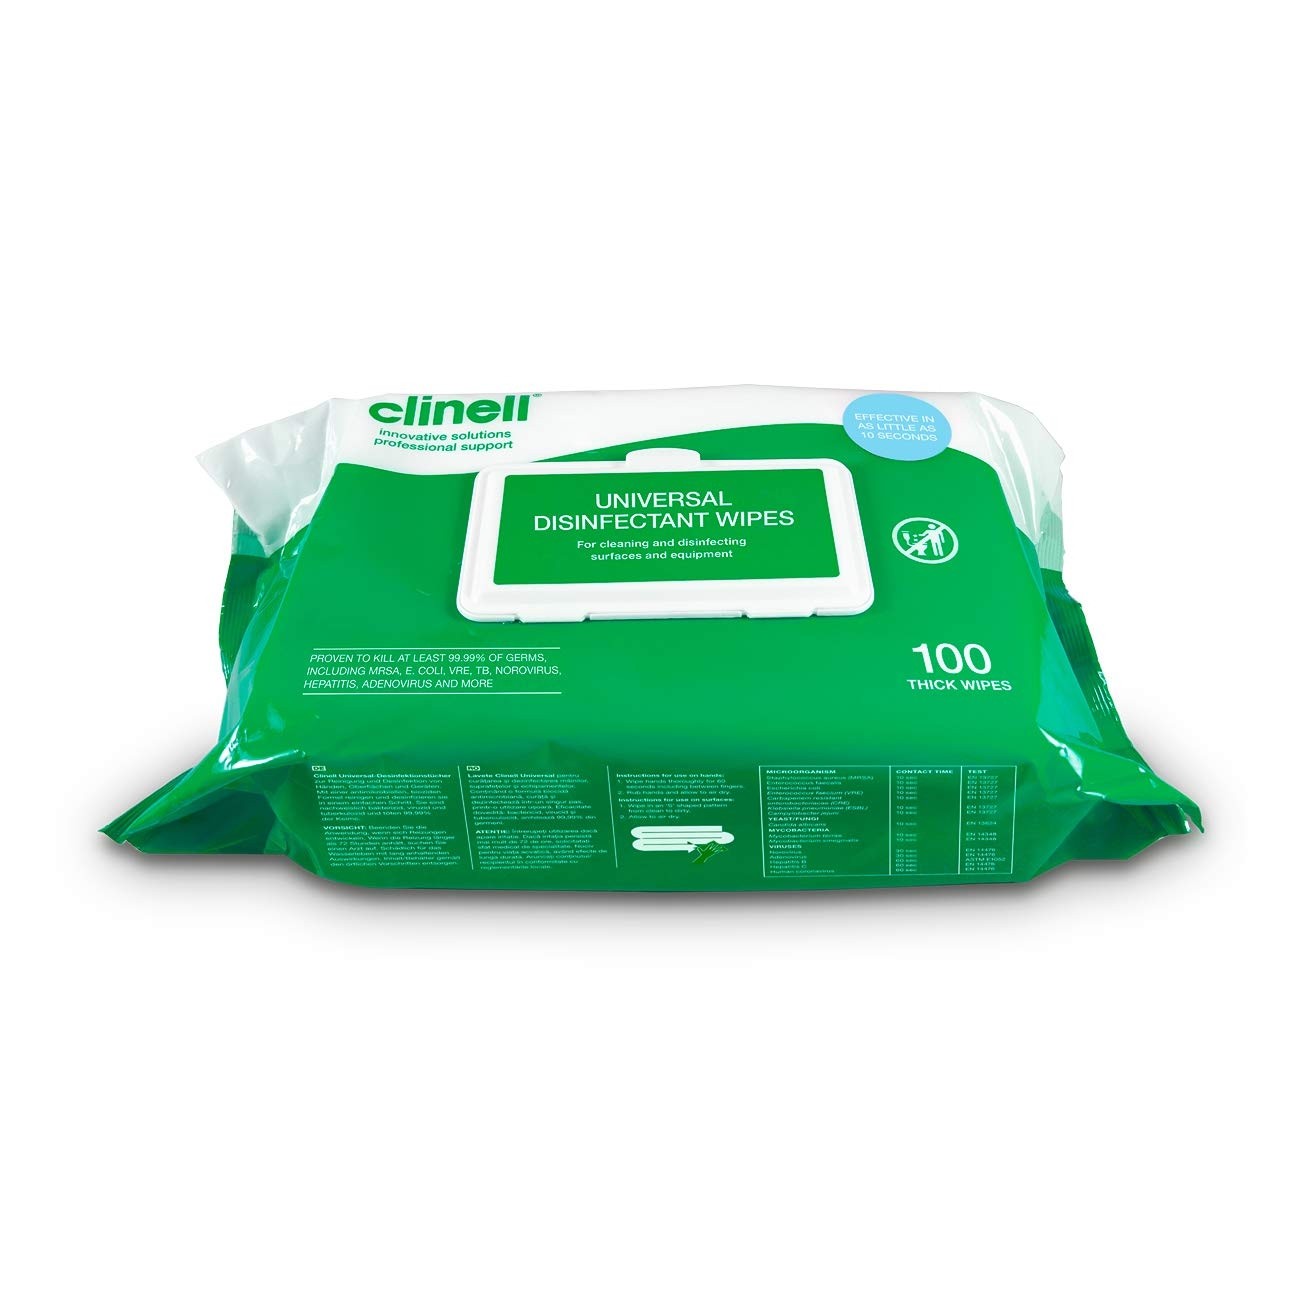 Clinell - Universal Cleaning and Surface Disinfection Wipes